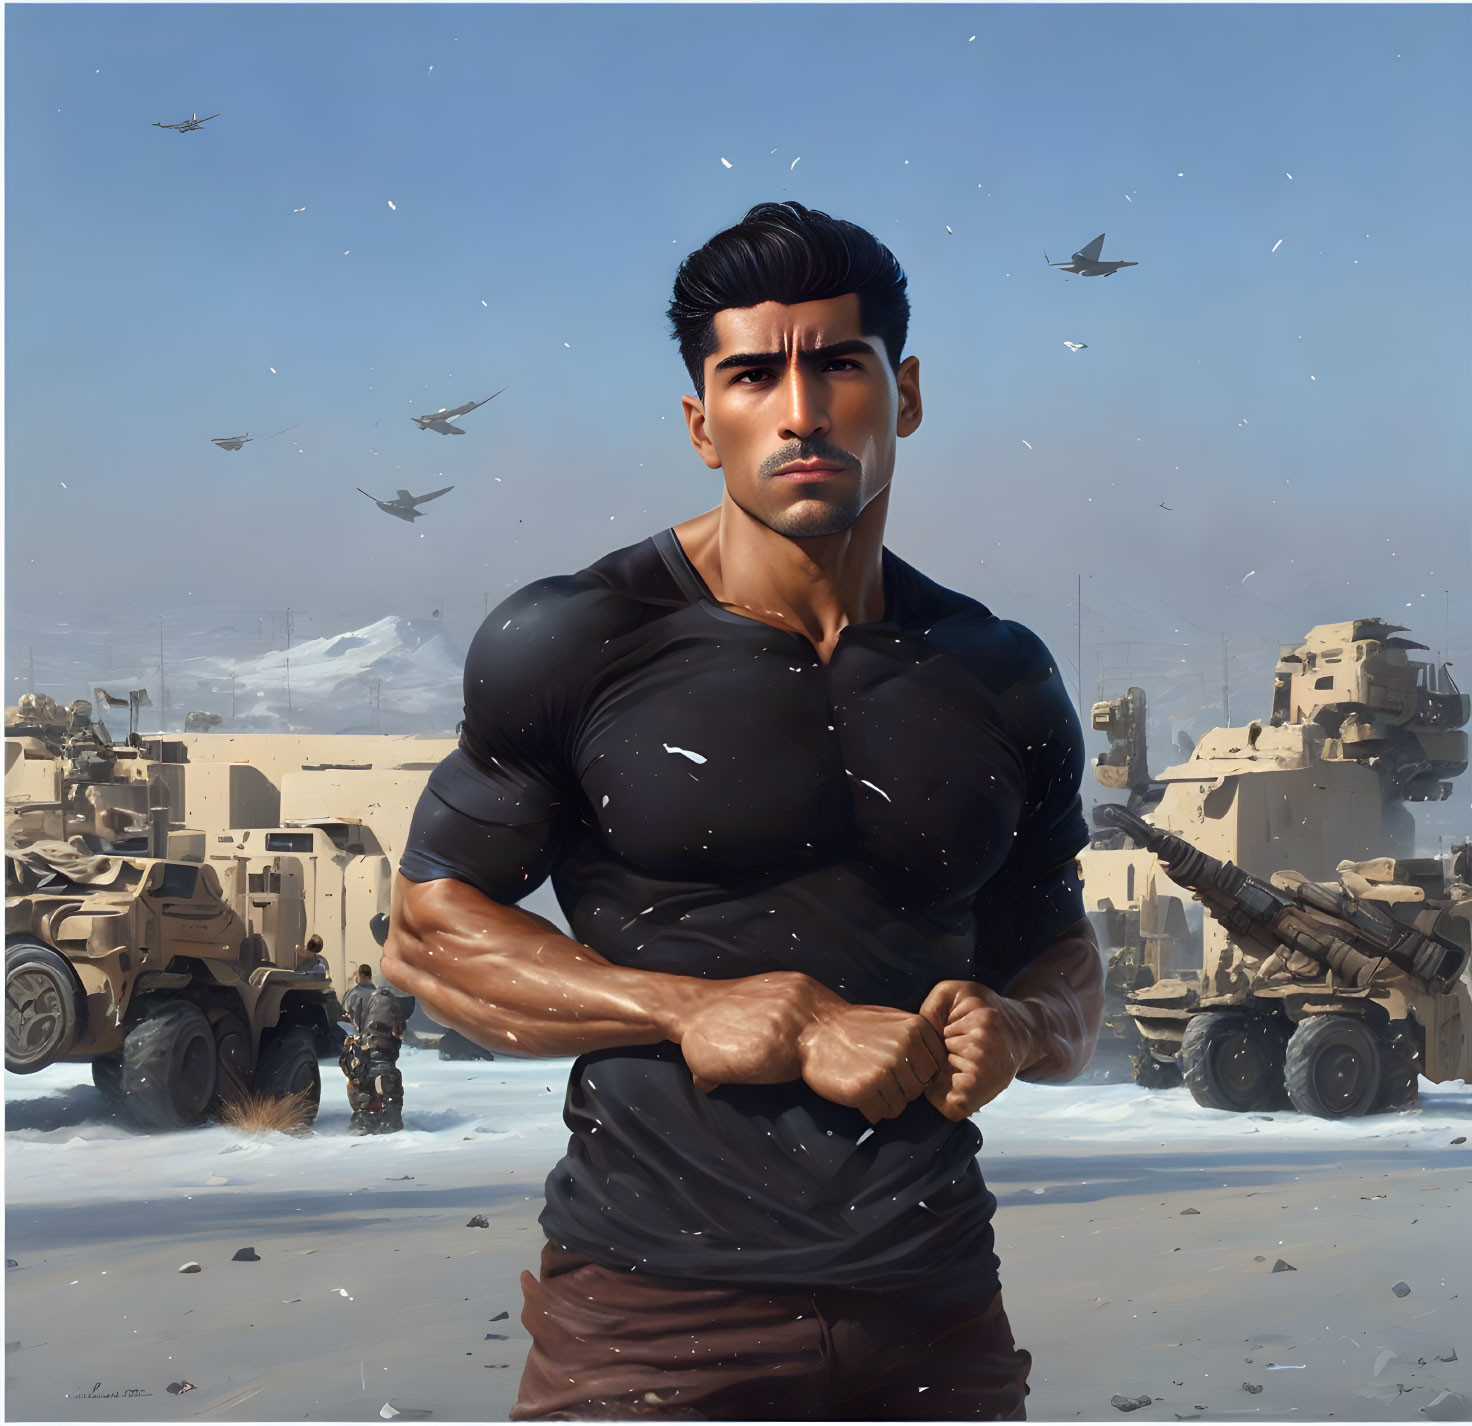 Muscular man in black shirt in warzone with military vehicles and helicopters